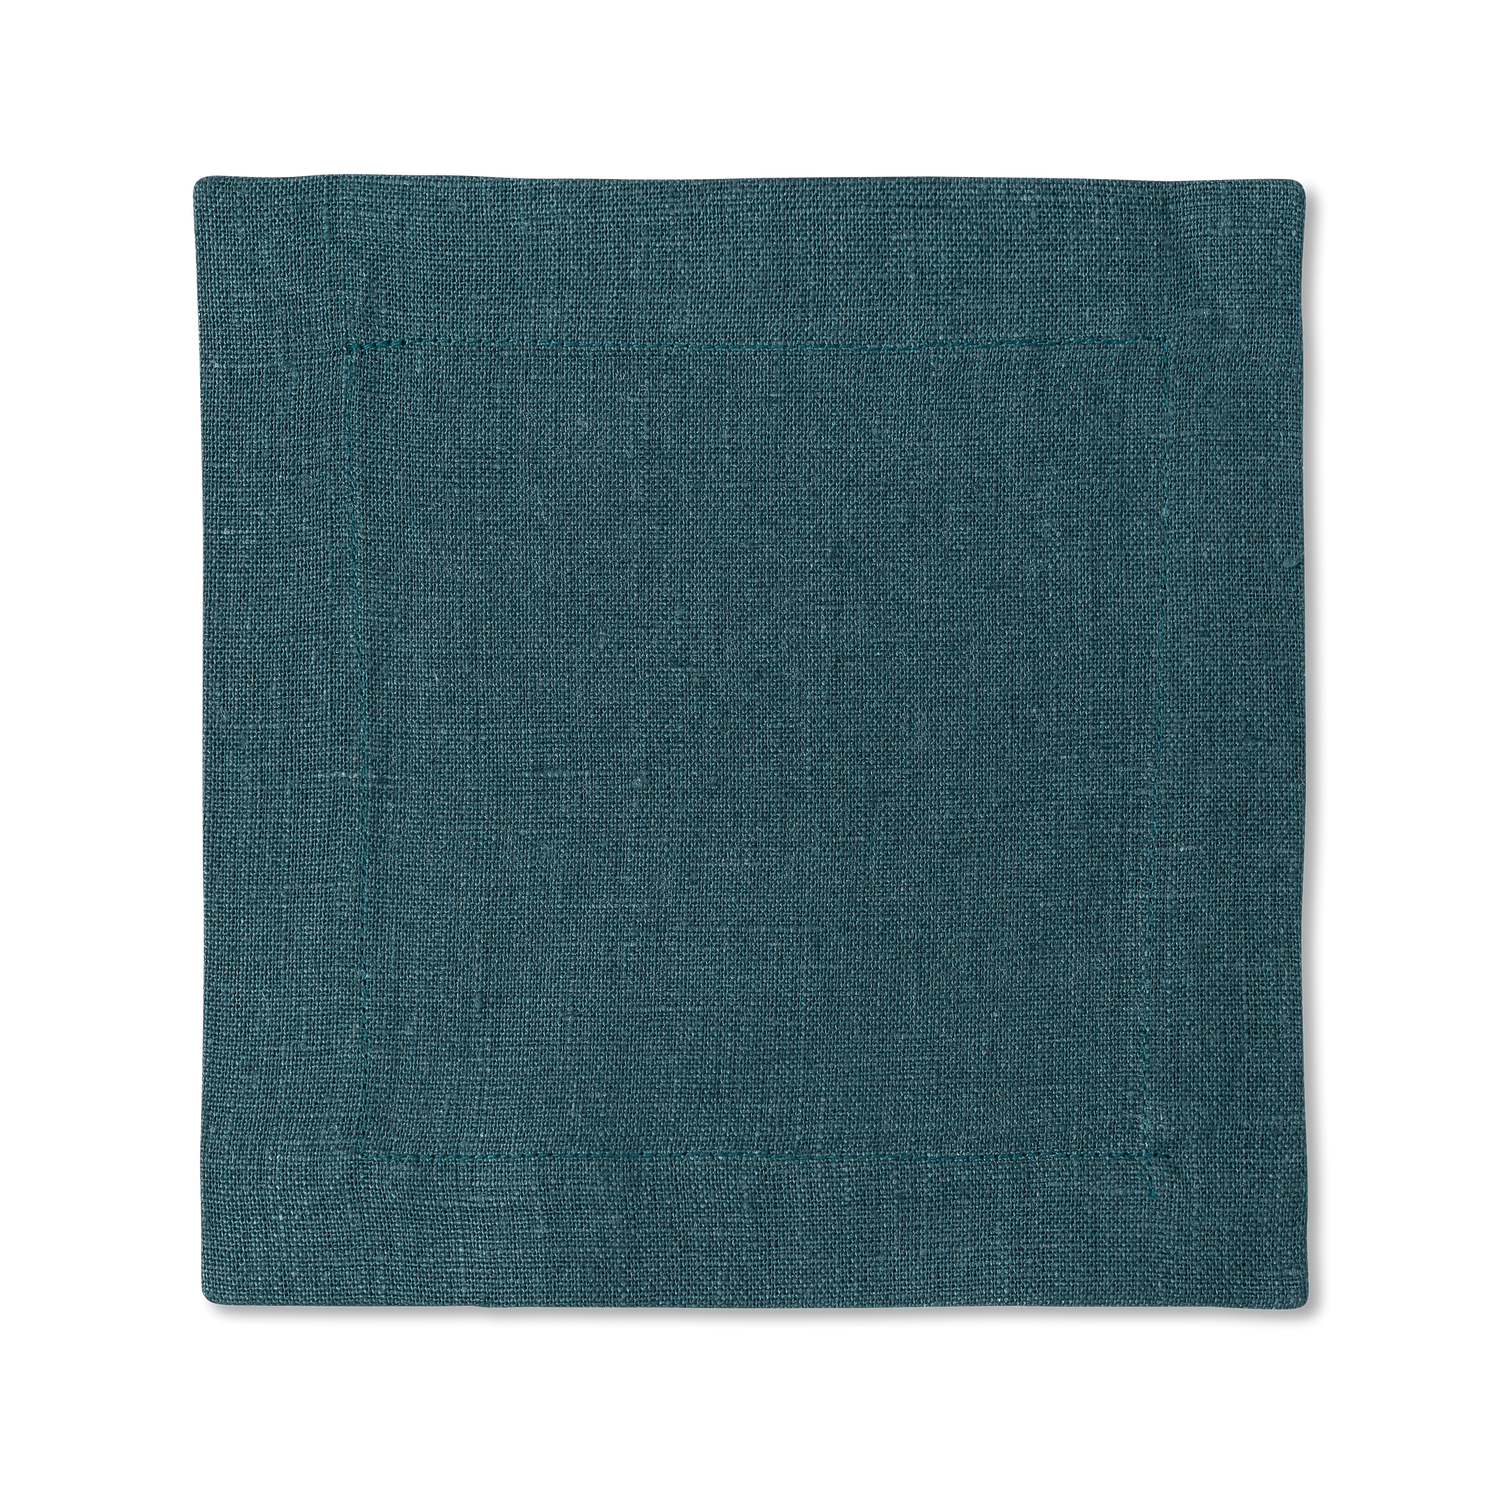 A square linen cocktail napkin in the color peacock